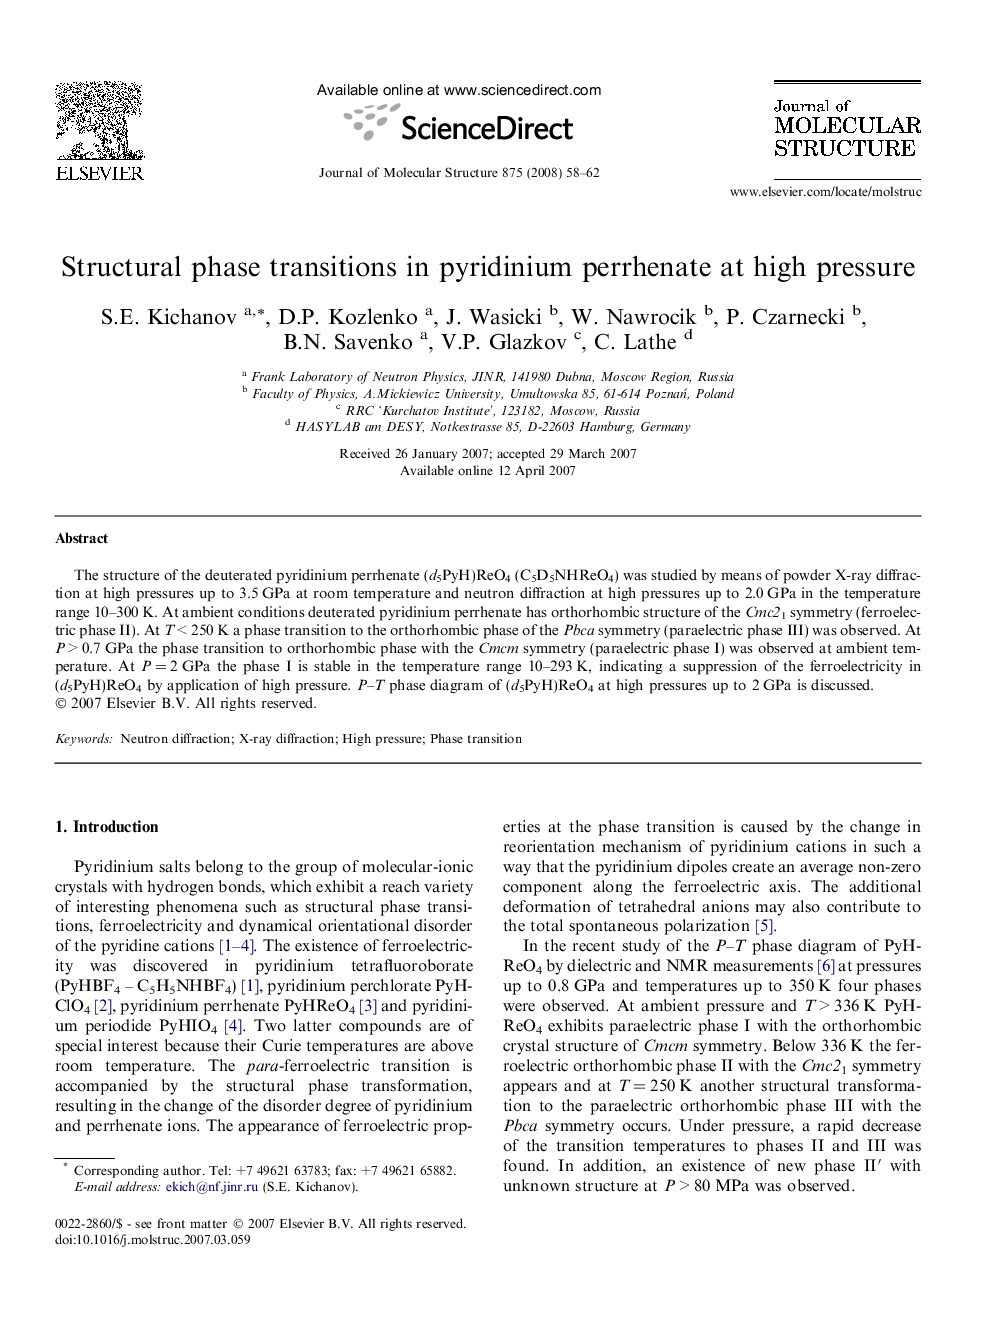 Structural phase transitions in pyridinium perrhenate at high pressure